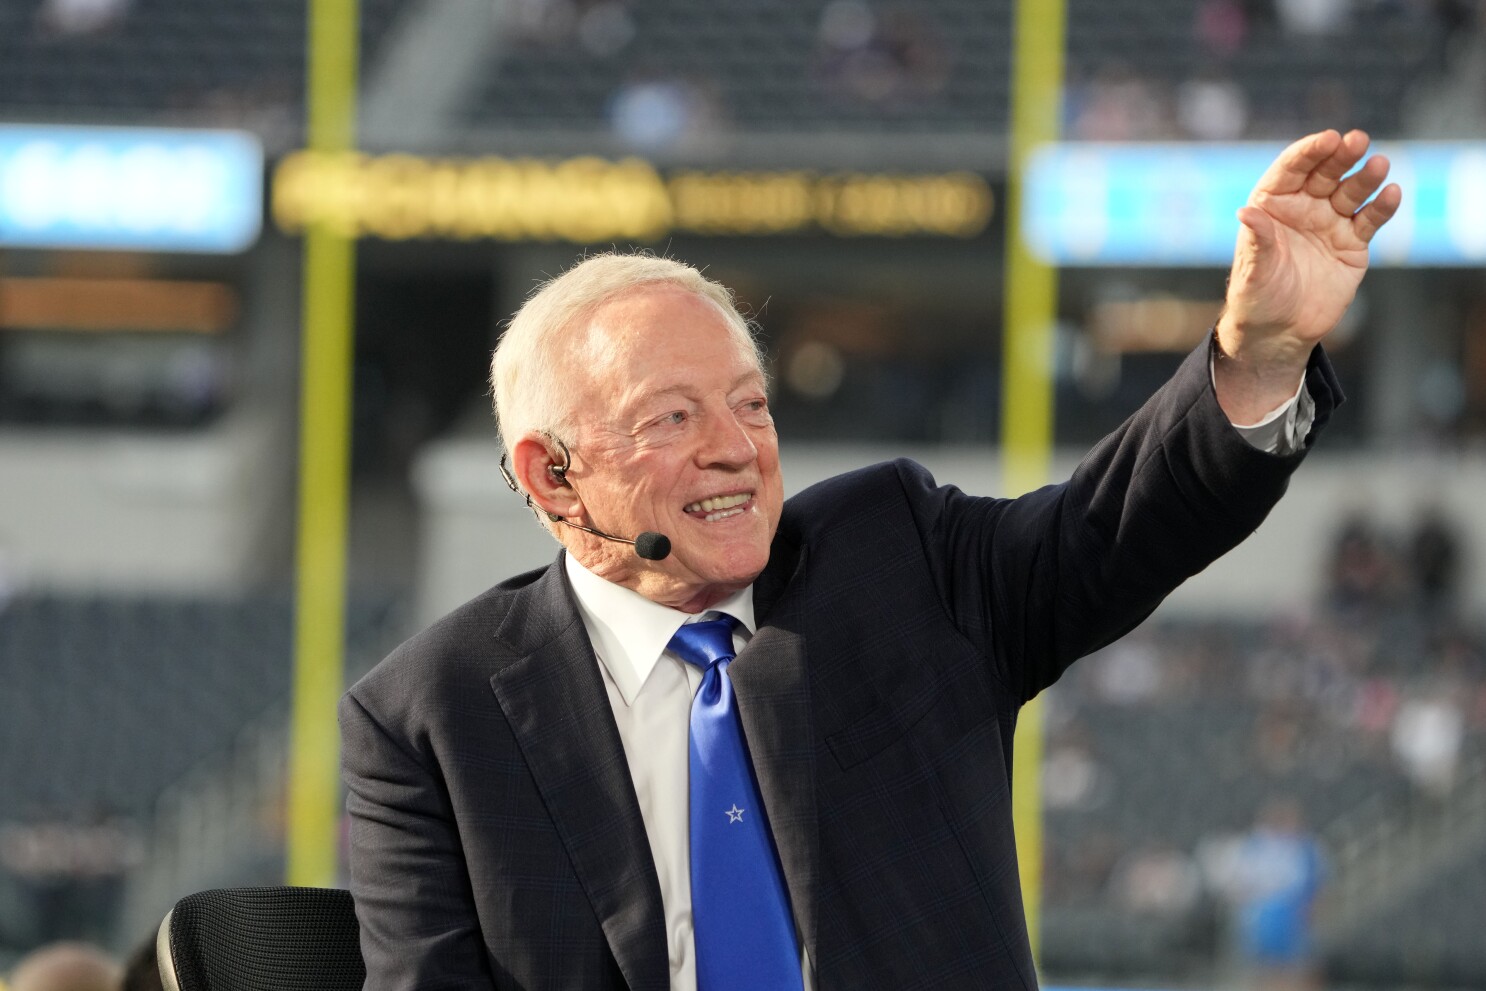 NFL News: Jerry Jones Reveals Bold Draft Plans For Dallas Cowboys After Losing Key Players